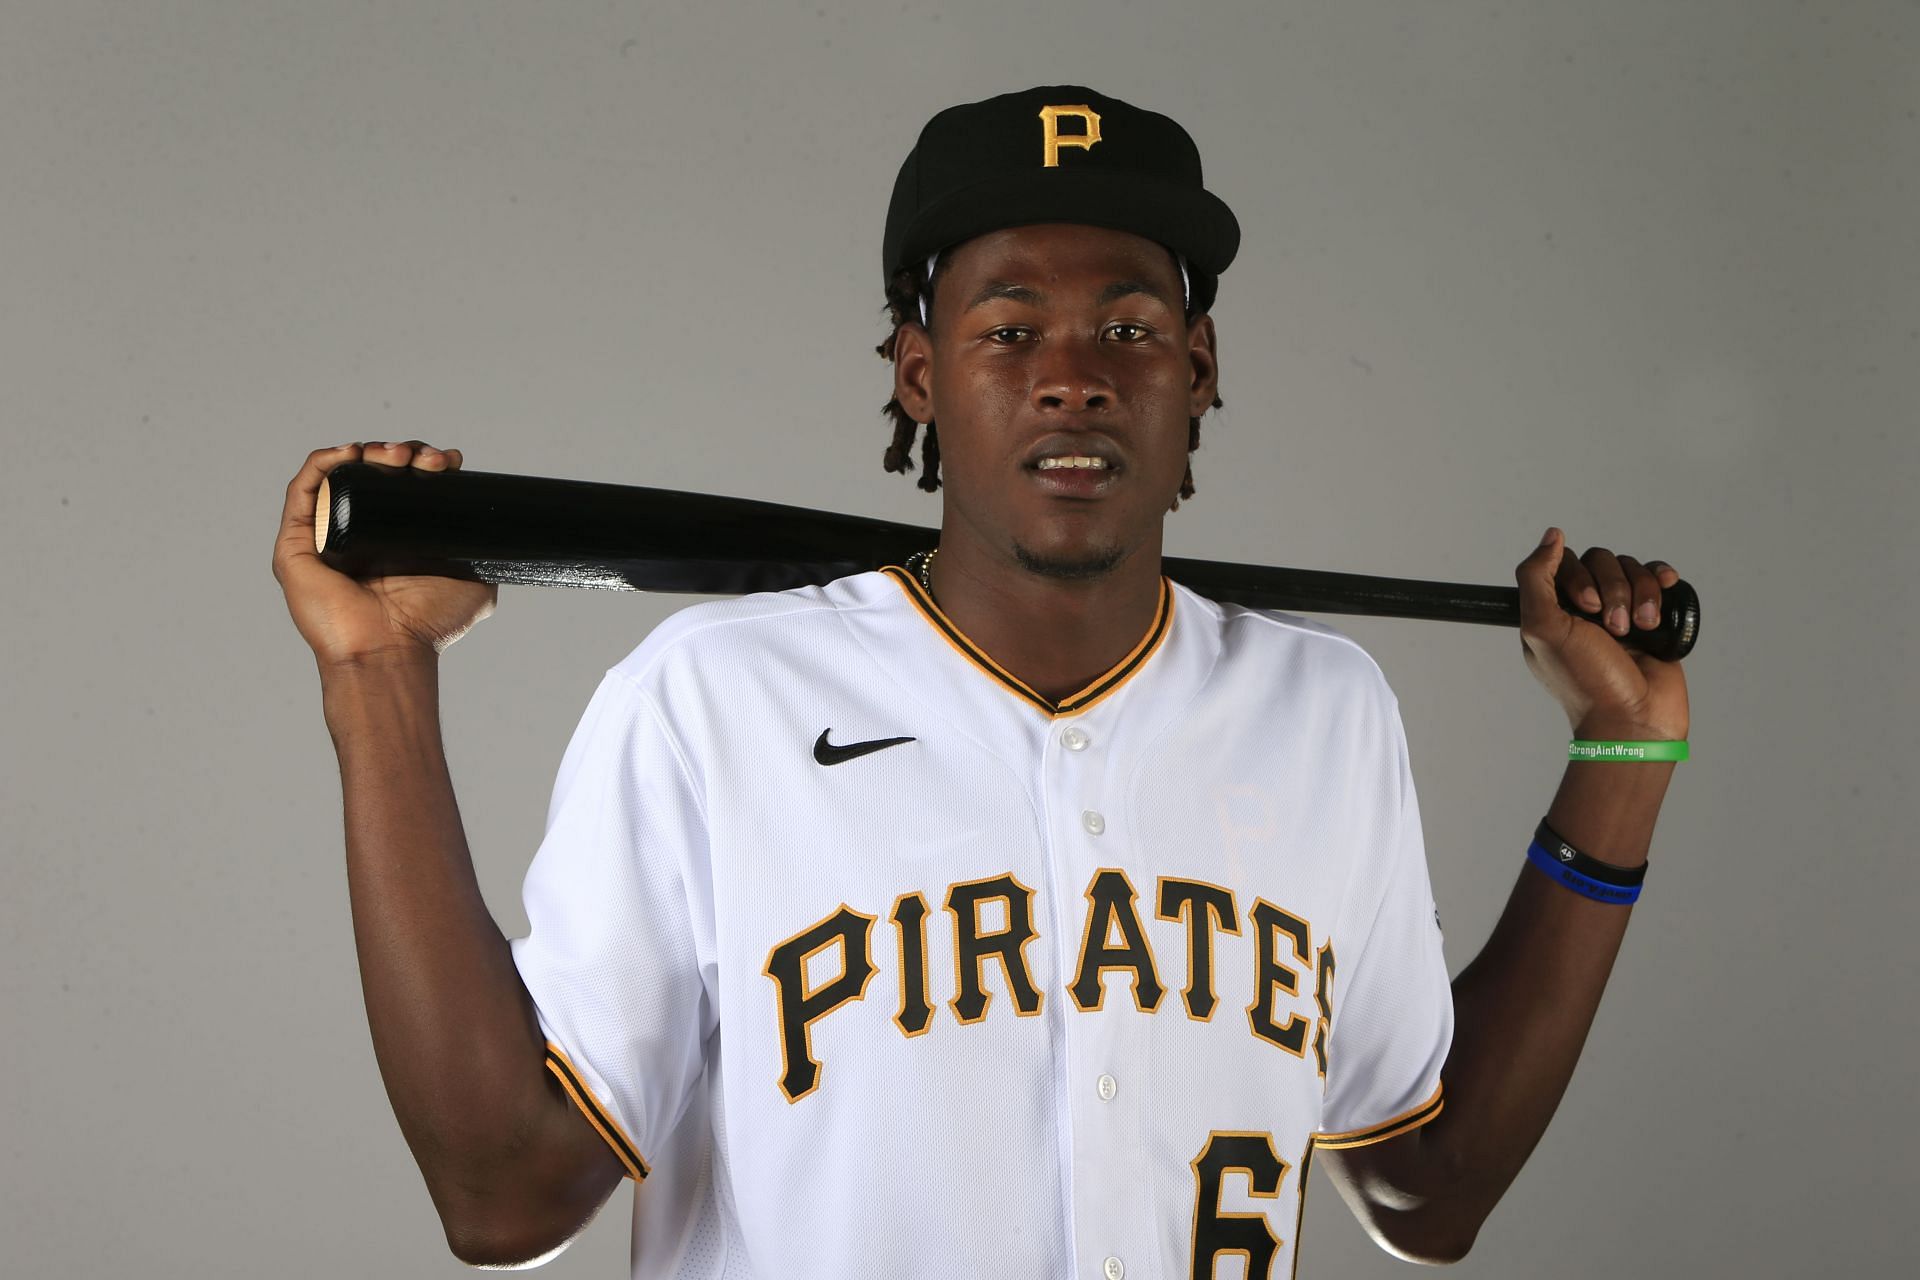 Finally called back to the majors, Pirates' Oneil Cruz showing he